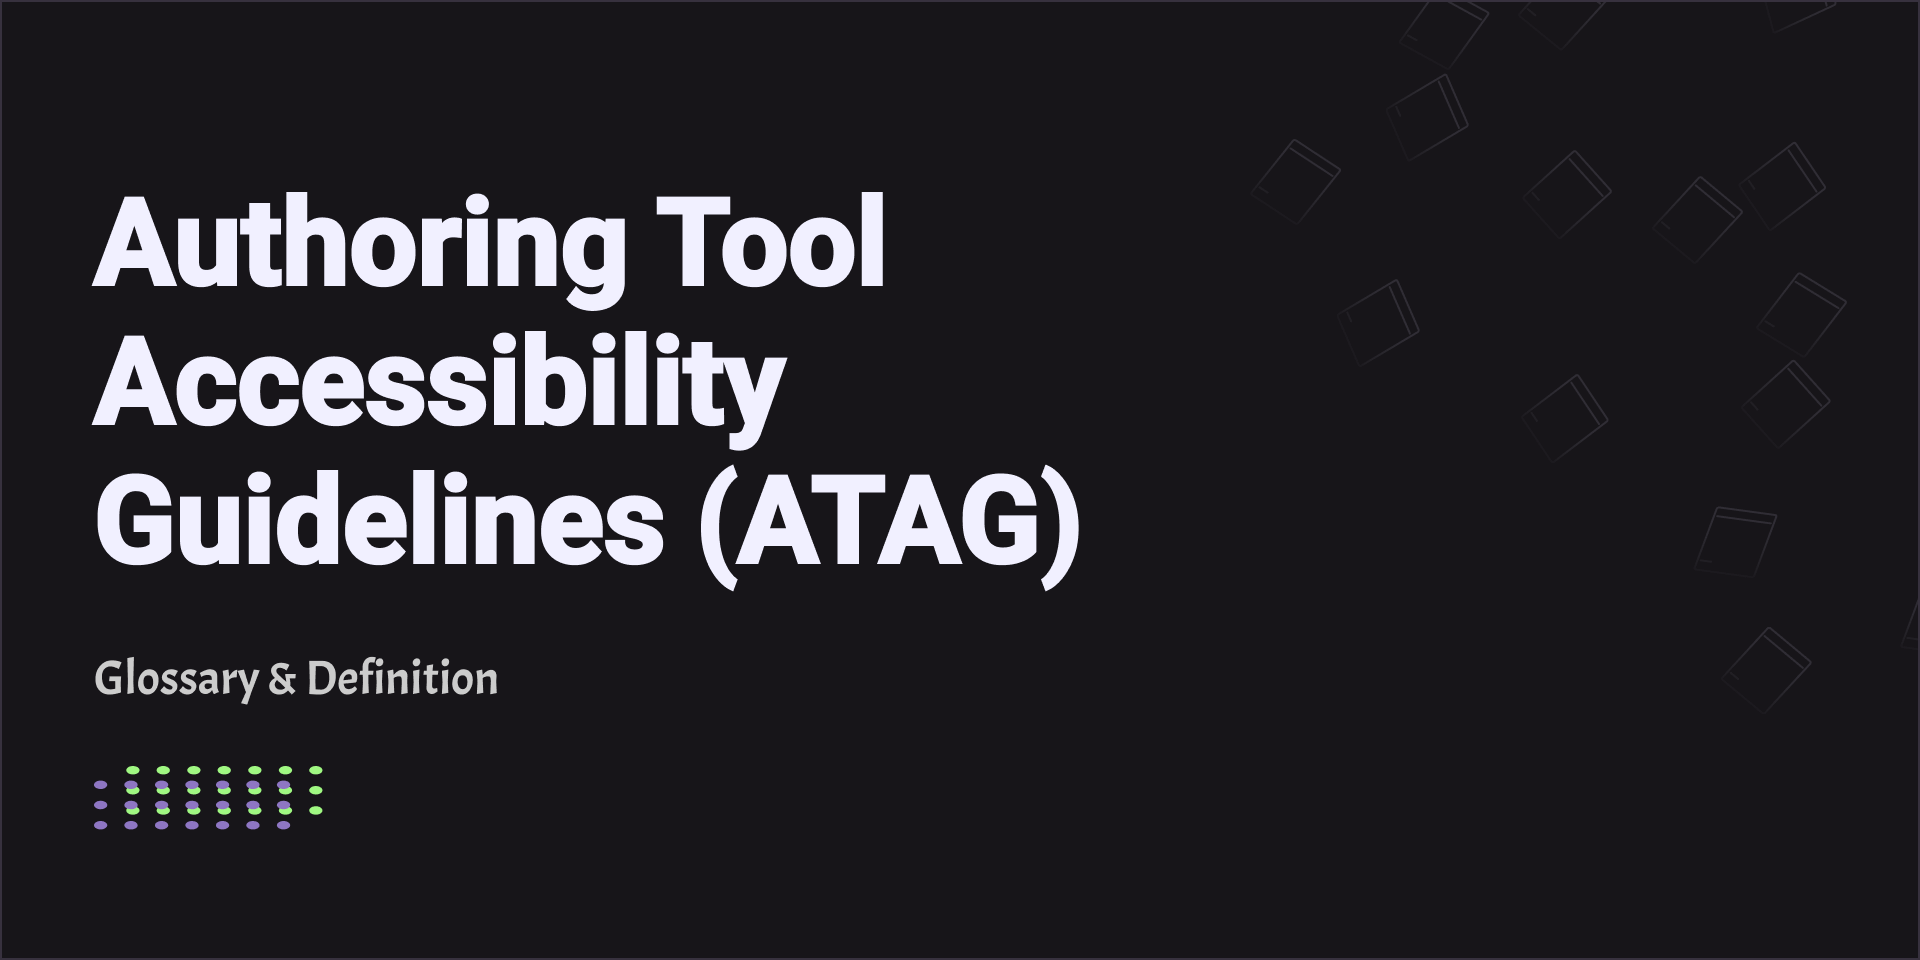 Authoring Tool Accessibility Guidelines (ATAG)